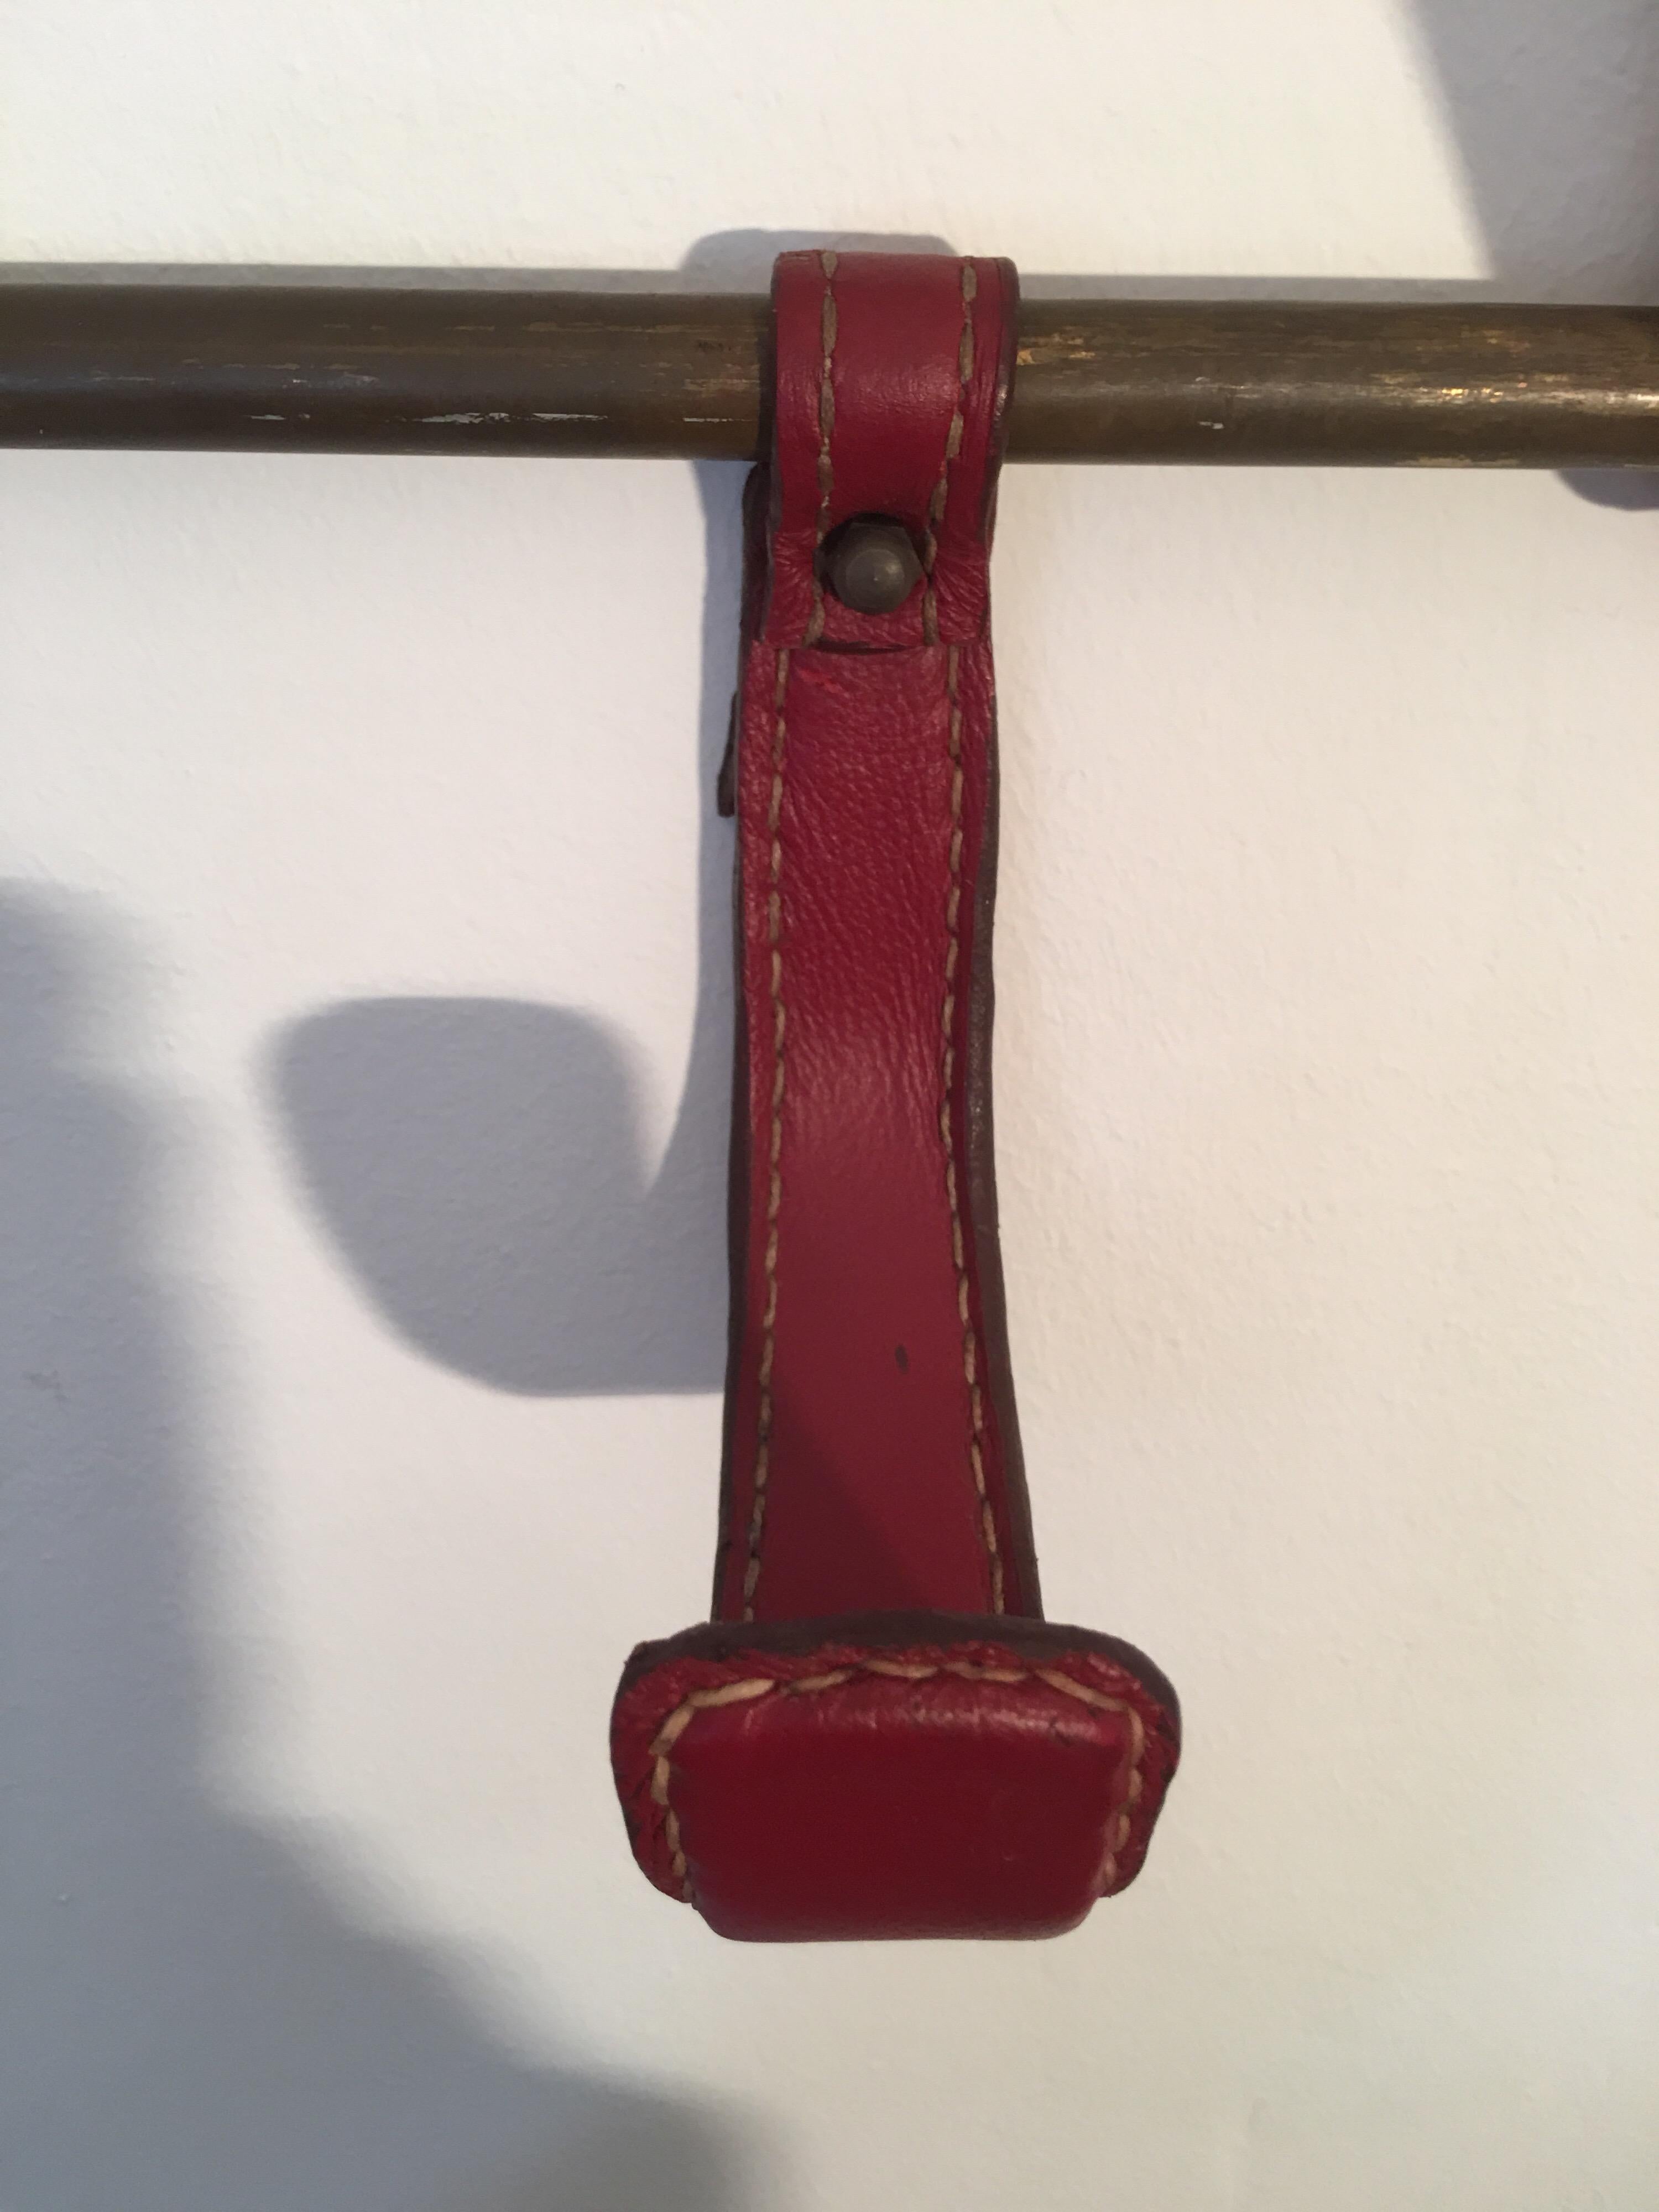 Jacques Adnet Red Stitched Leather Coat Rack, Brass Hat Rack, French, 1950s For Sale 7